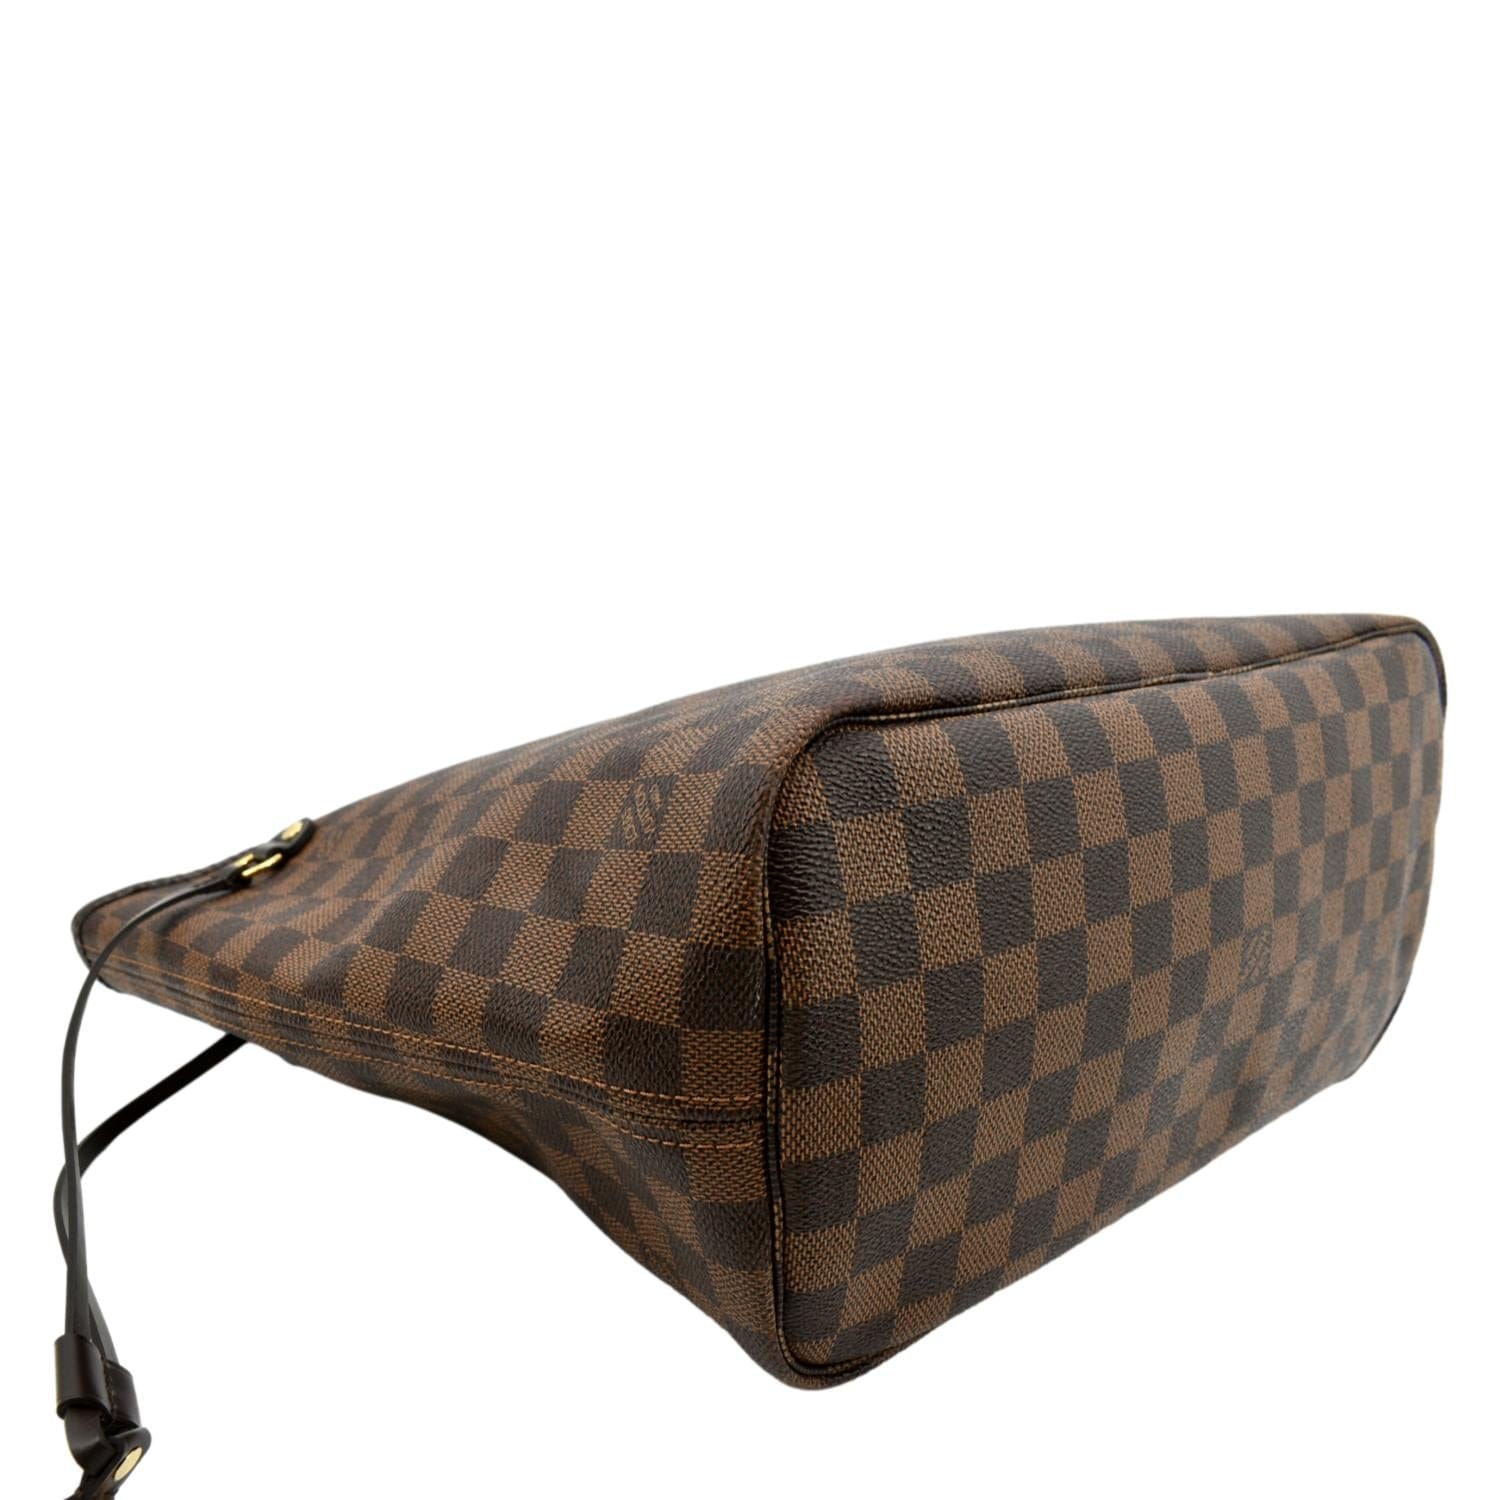 Louis Vuitton Leather Neverfull MM in Damier Ebene